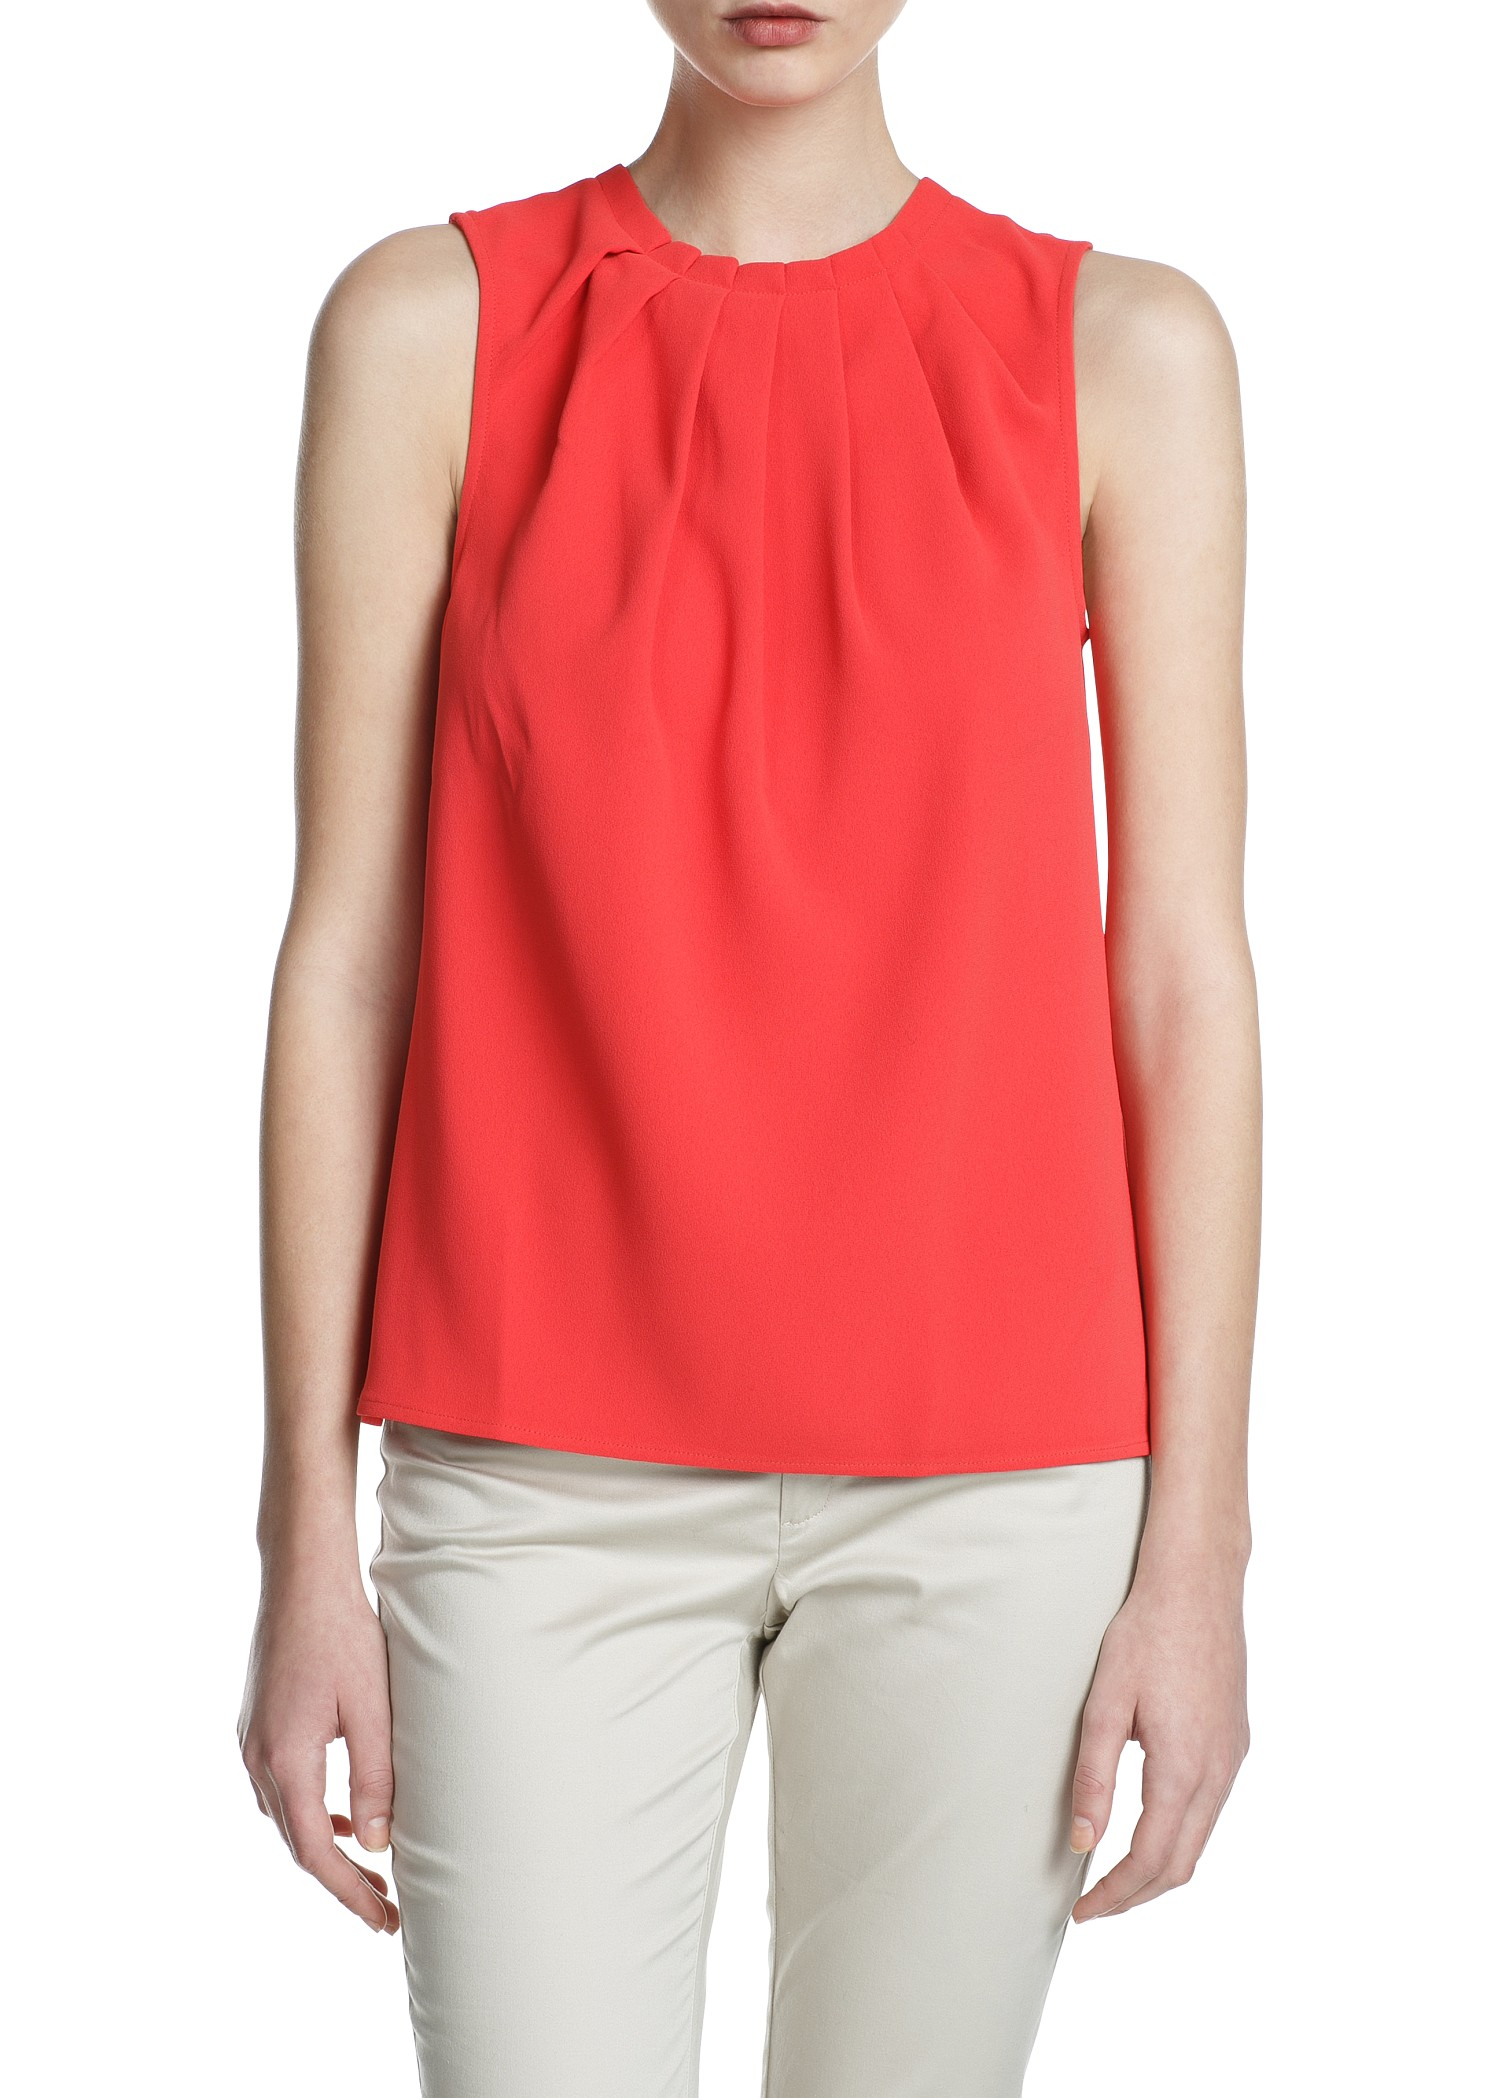 Lyst - Mango Pleated Neck Crepe Blouse in Red